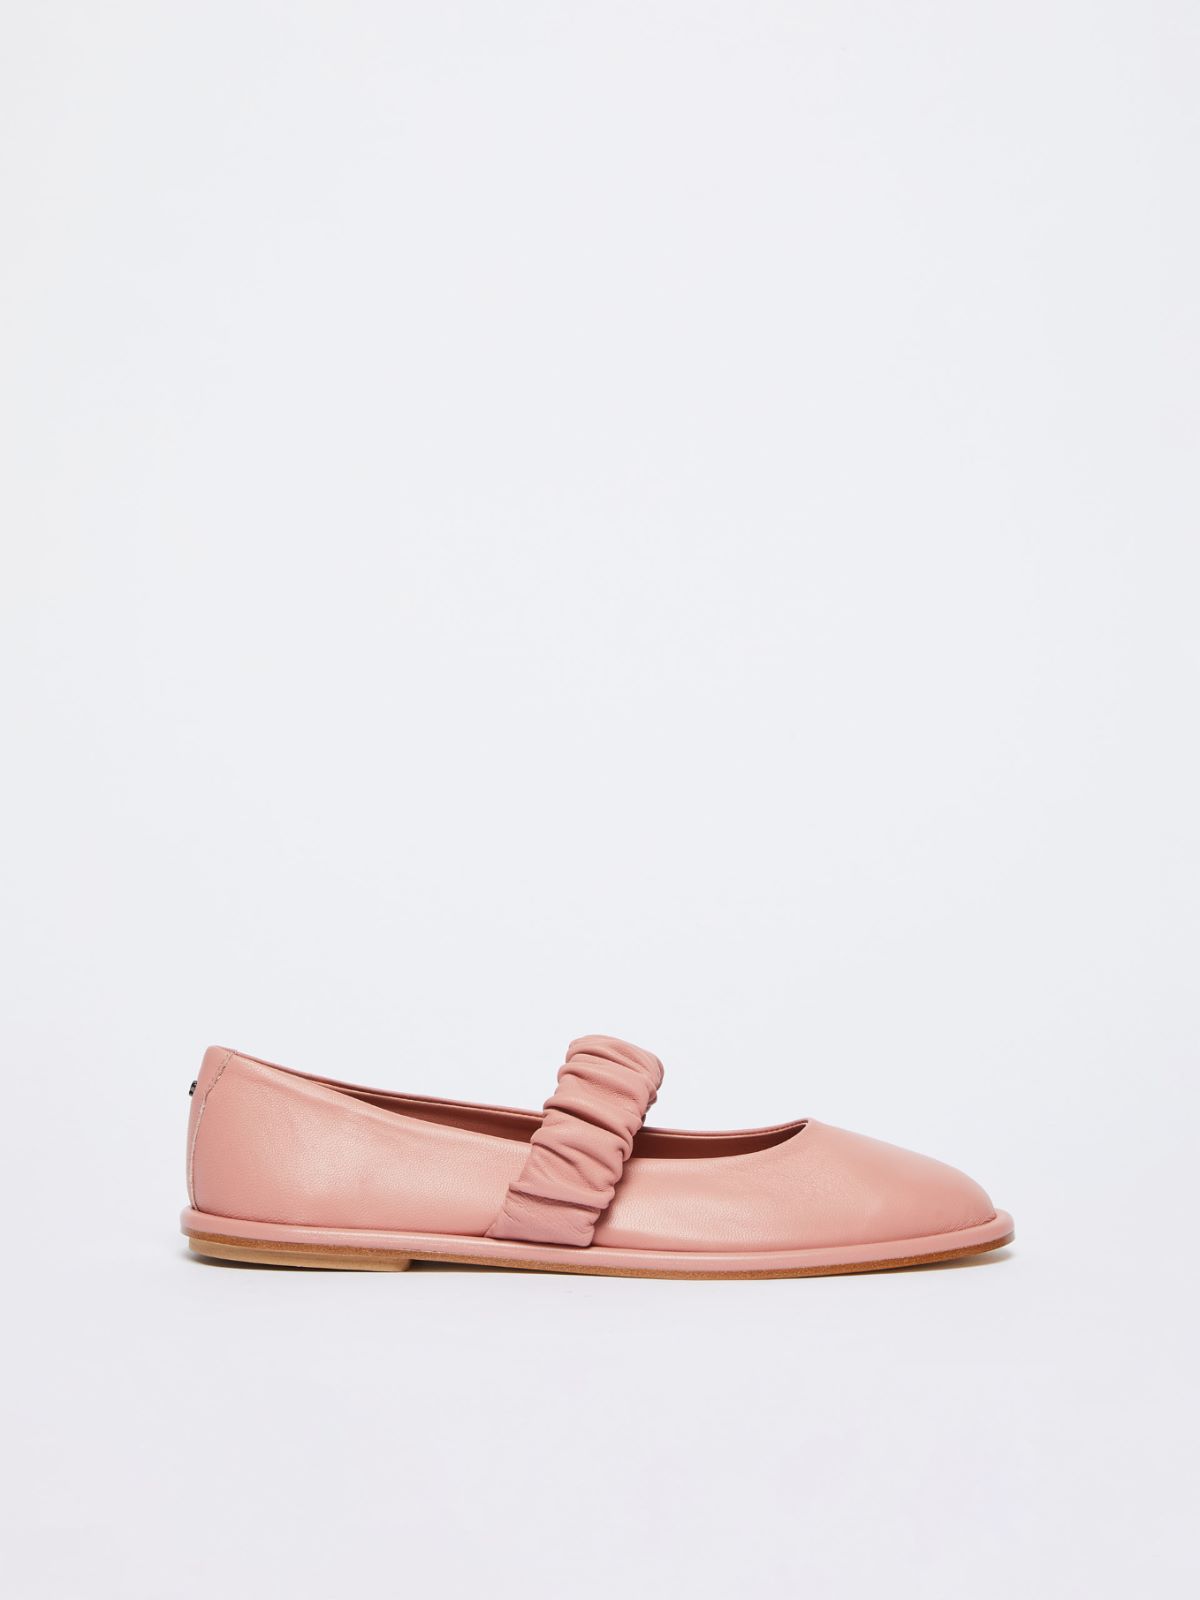 Ballet flats in nappa leather, antique rose | Weekend Max Mara